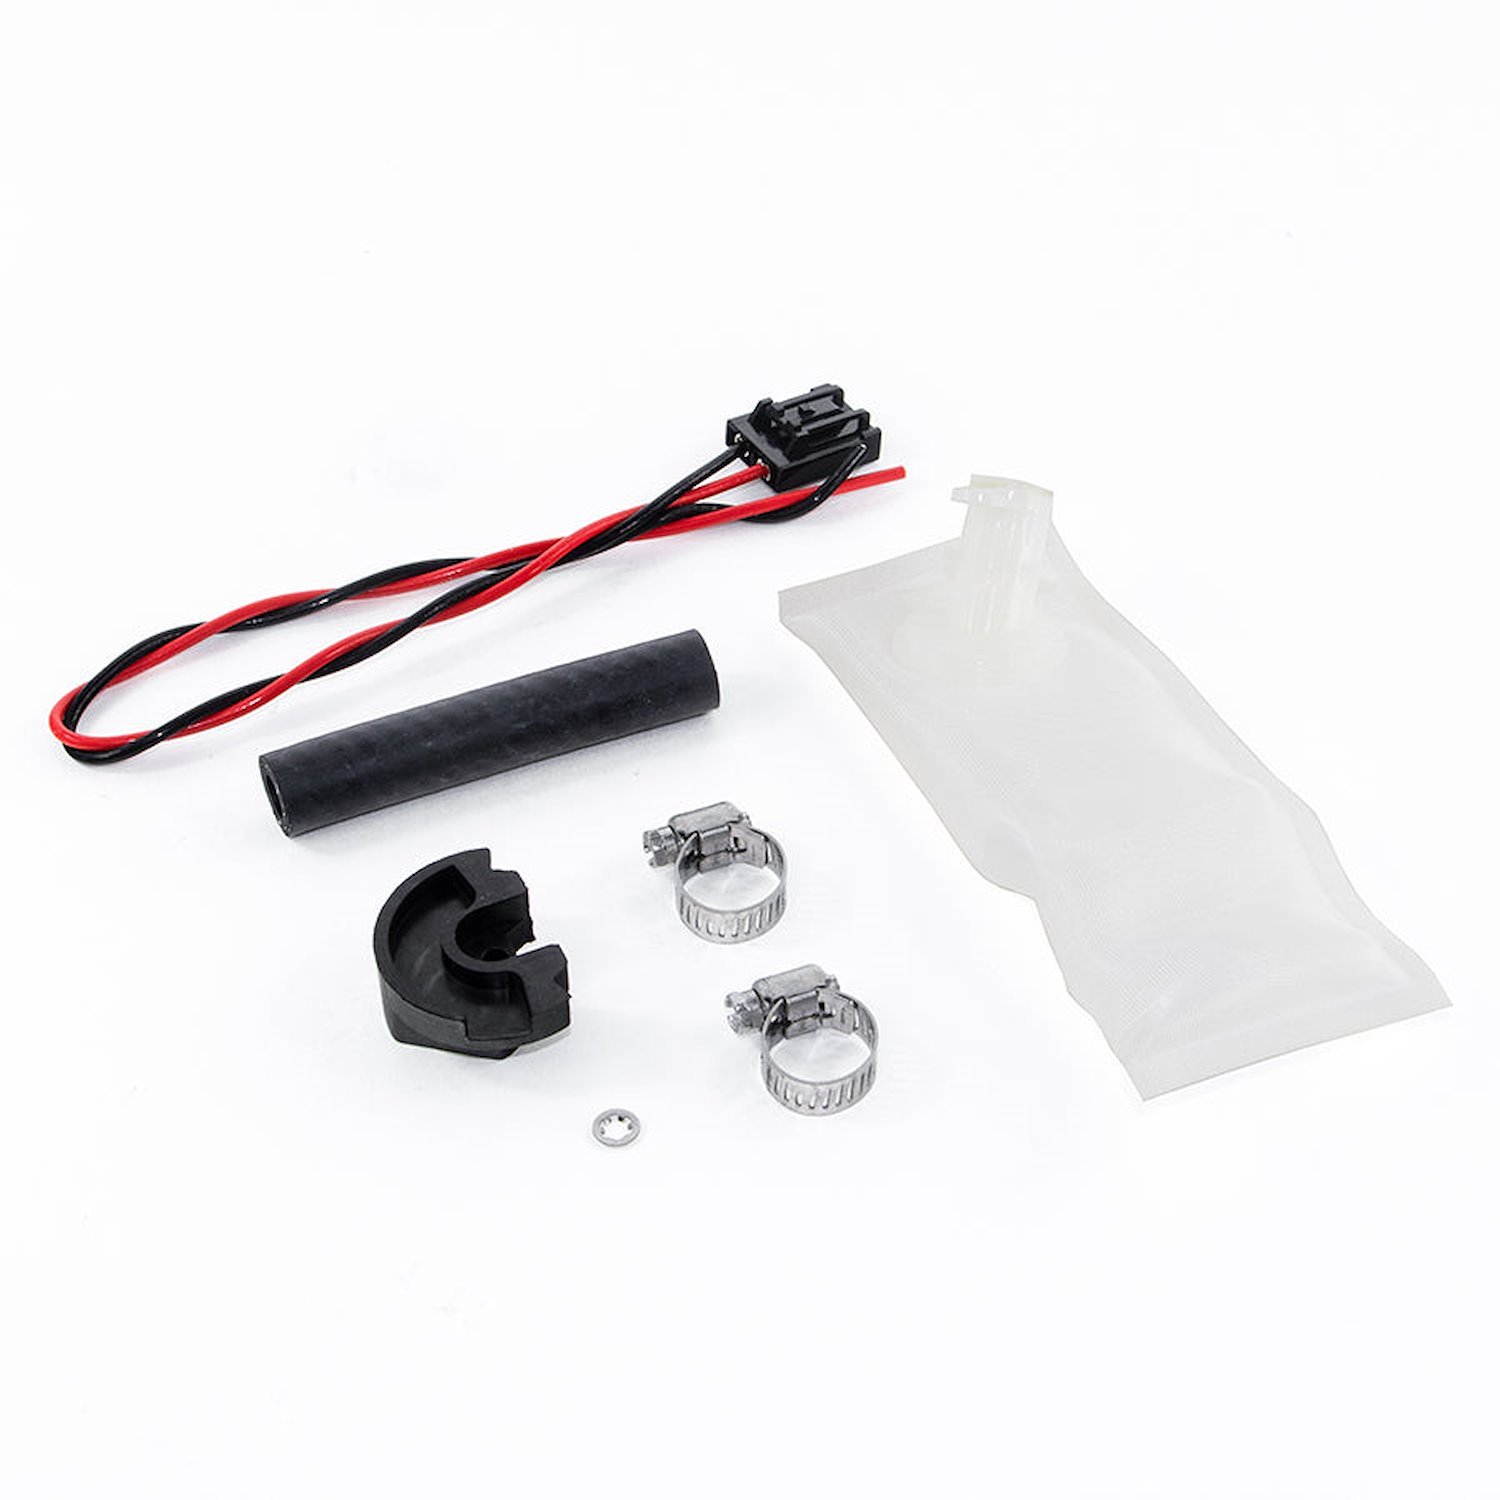 91024 Install kit for DW100 DW200 and DW300 for 94-02 Nissan 240SX S14/S15 and 93-01 Nissan Skyline R33/R34 Non-GTR